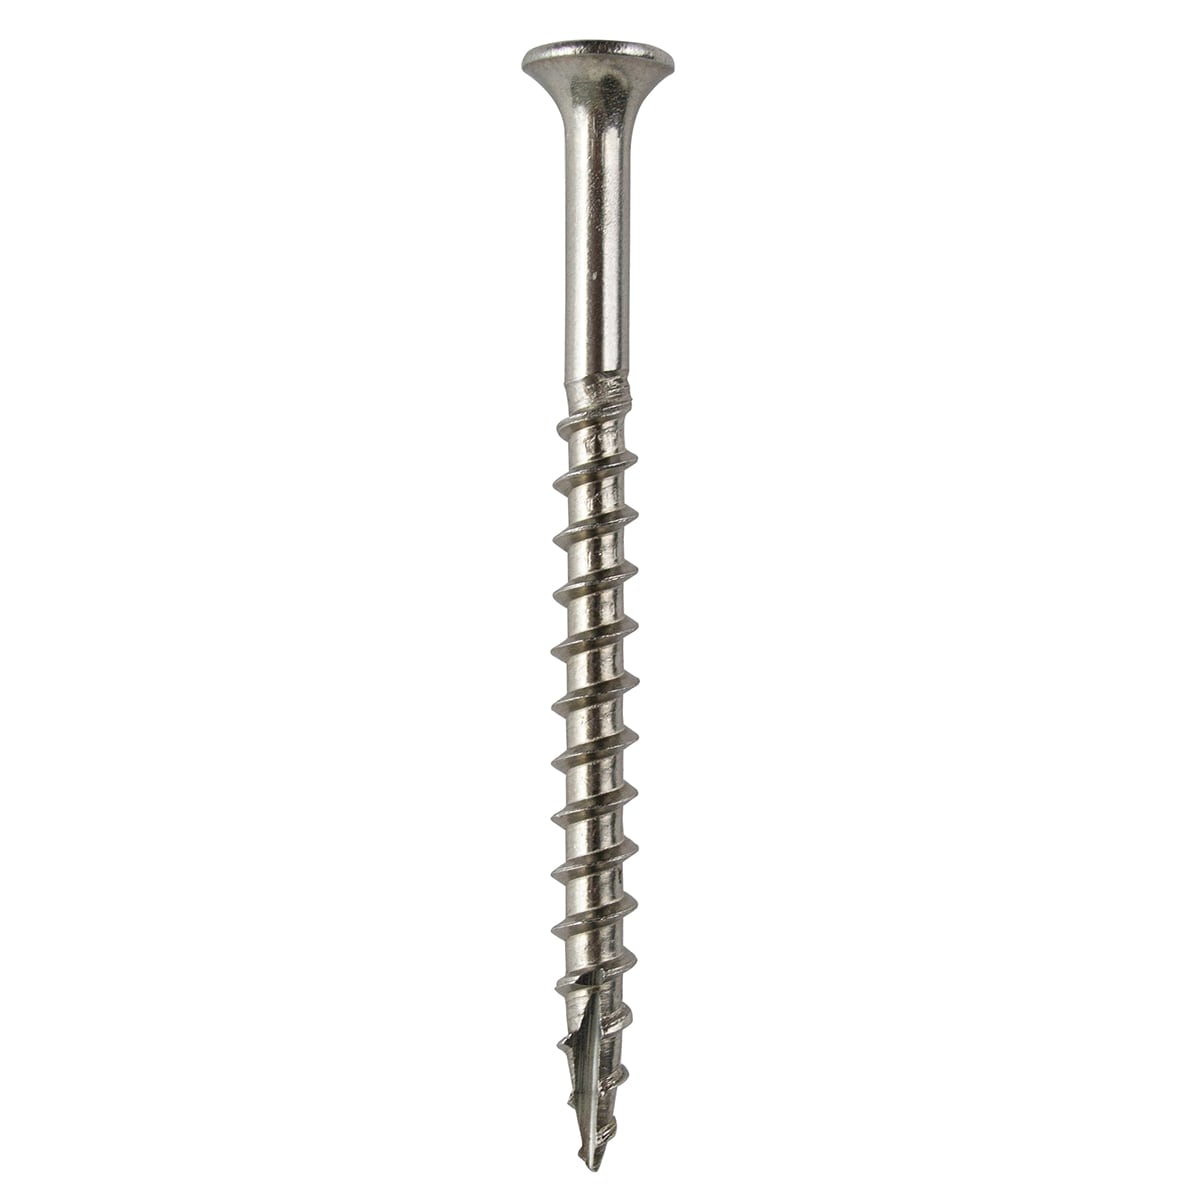 #10 x 2 1/2" Stainless Steel Square Drive Wood Deck Screws Grip Rite 50 Pieces 